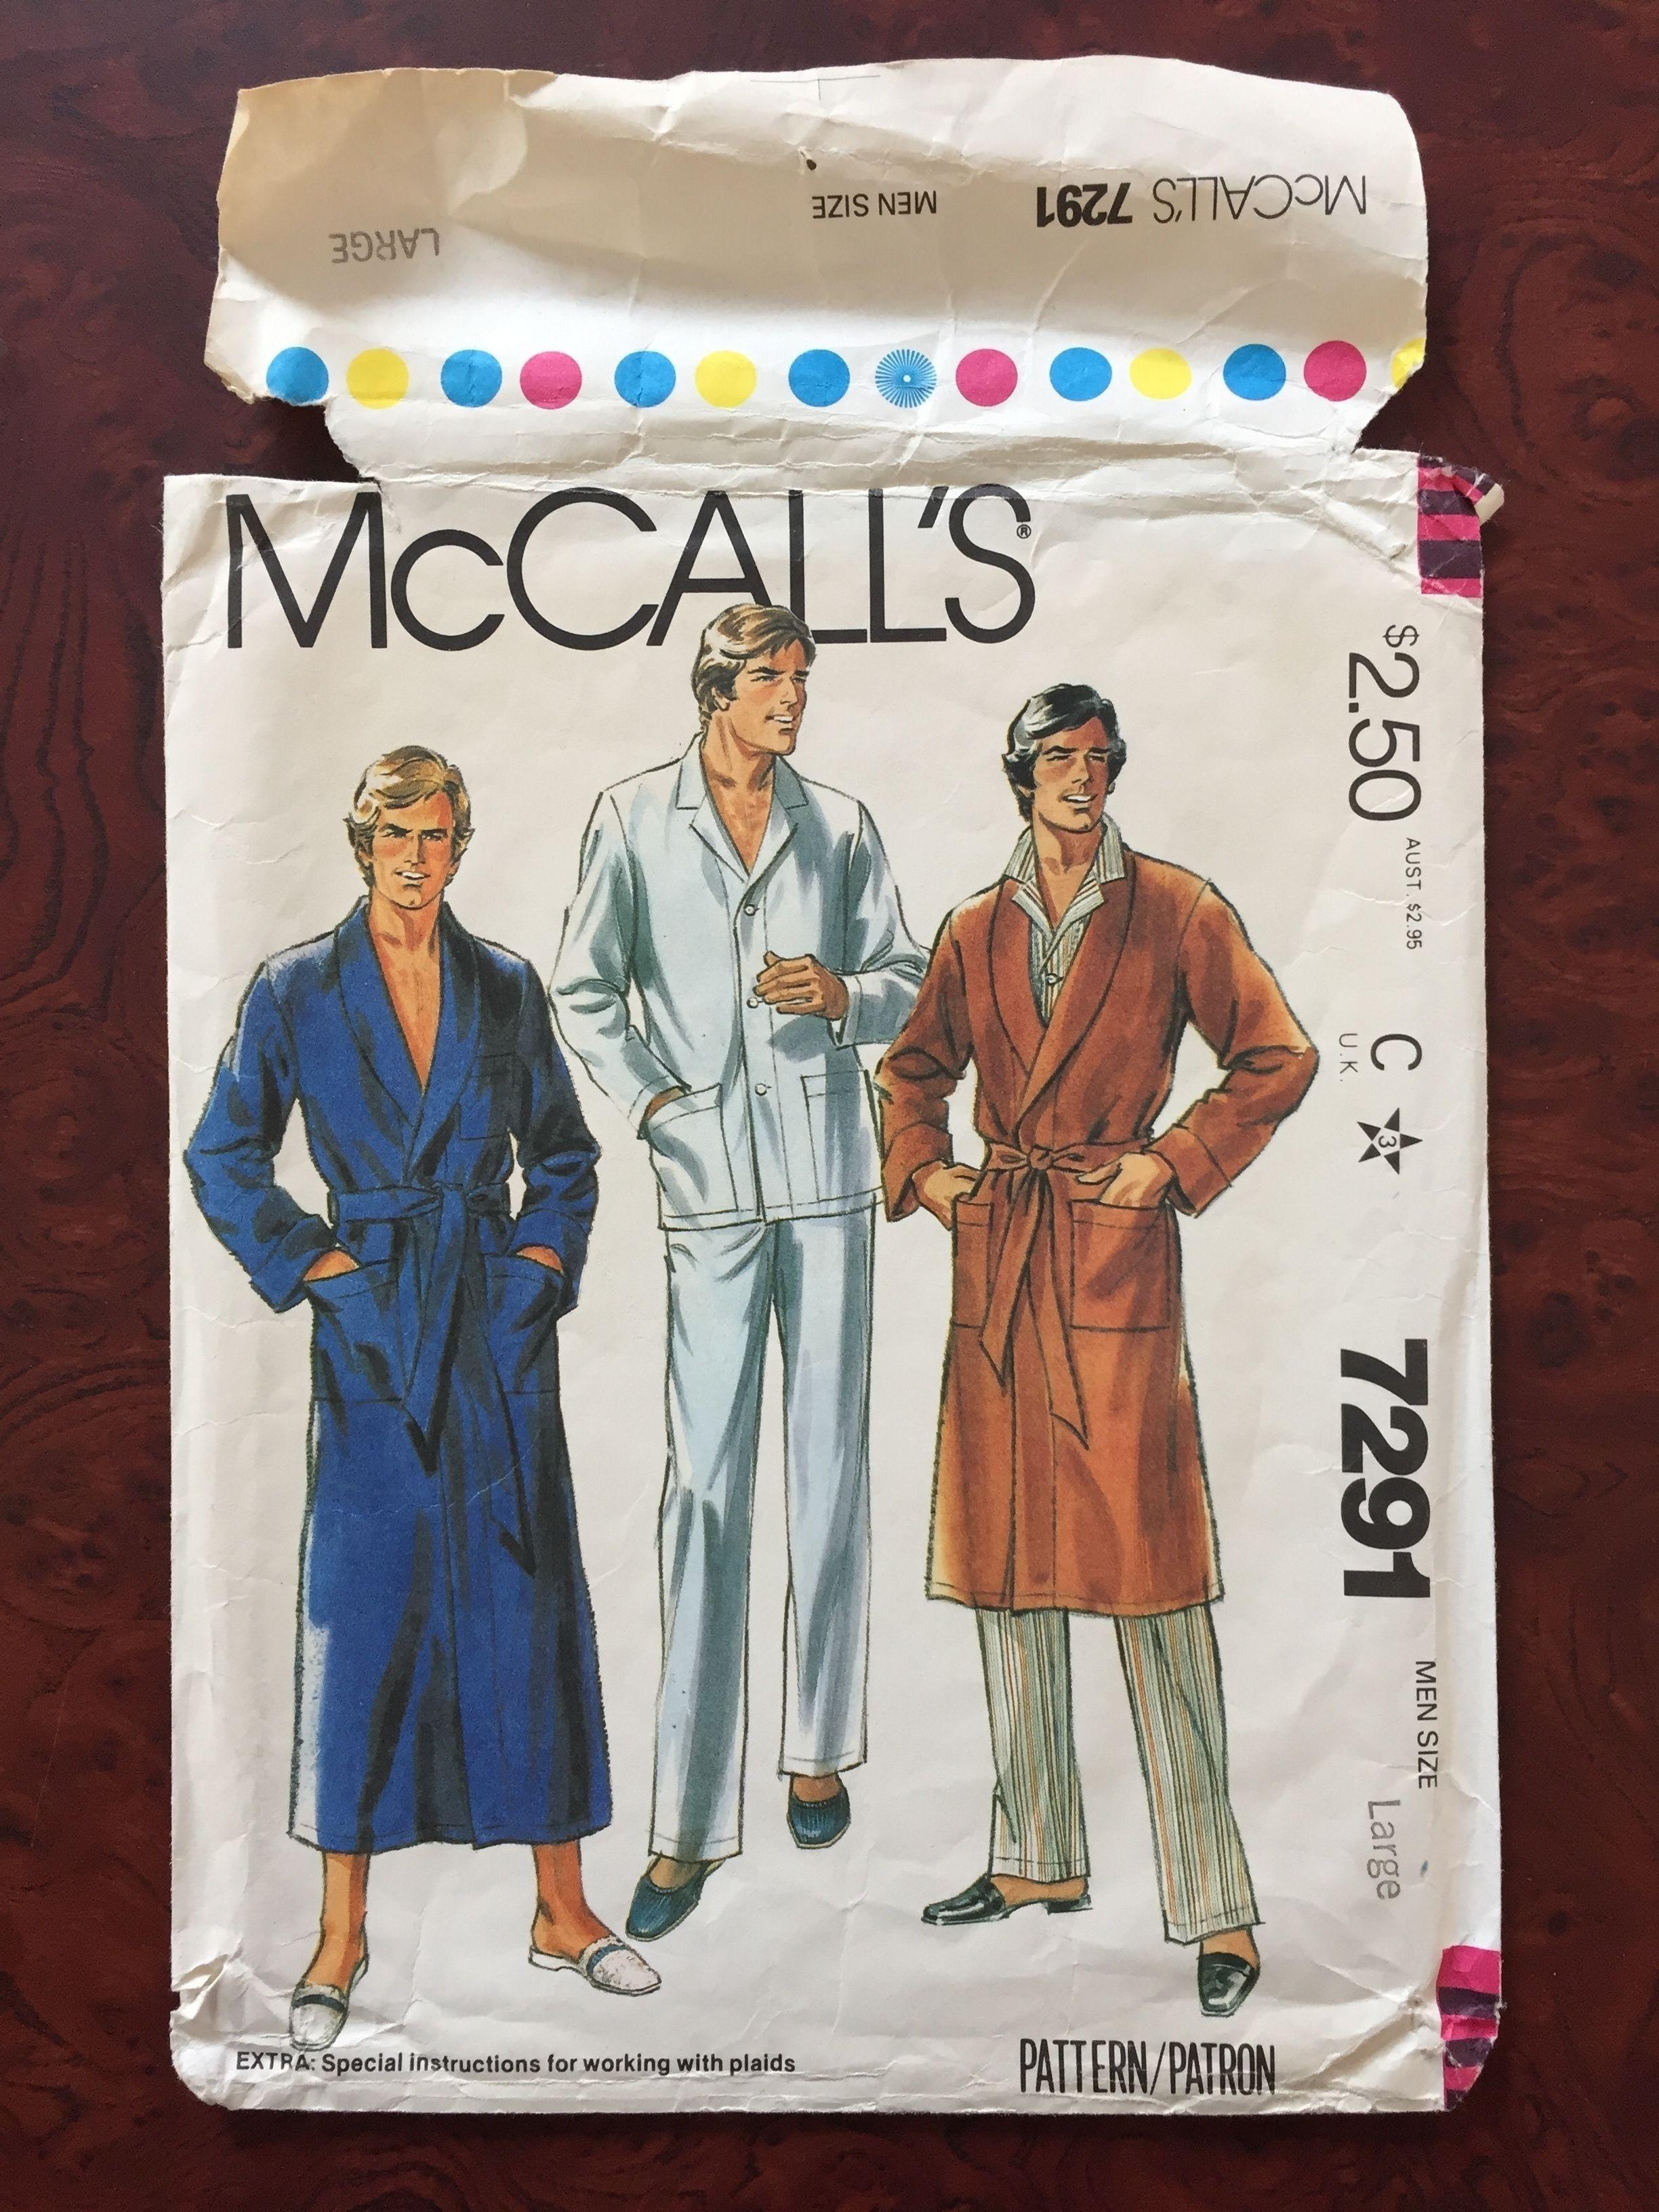 McCall's Logo - McCall's patterns logo and packaging